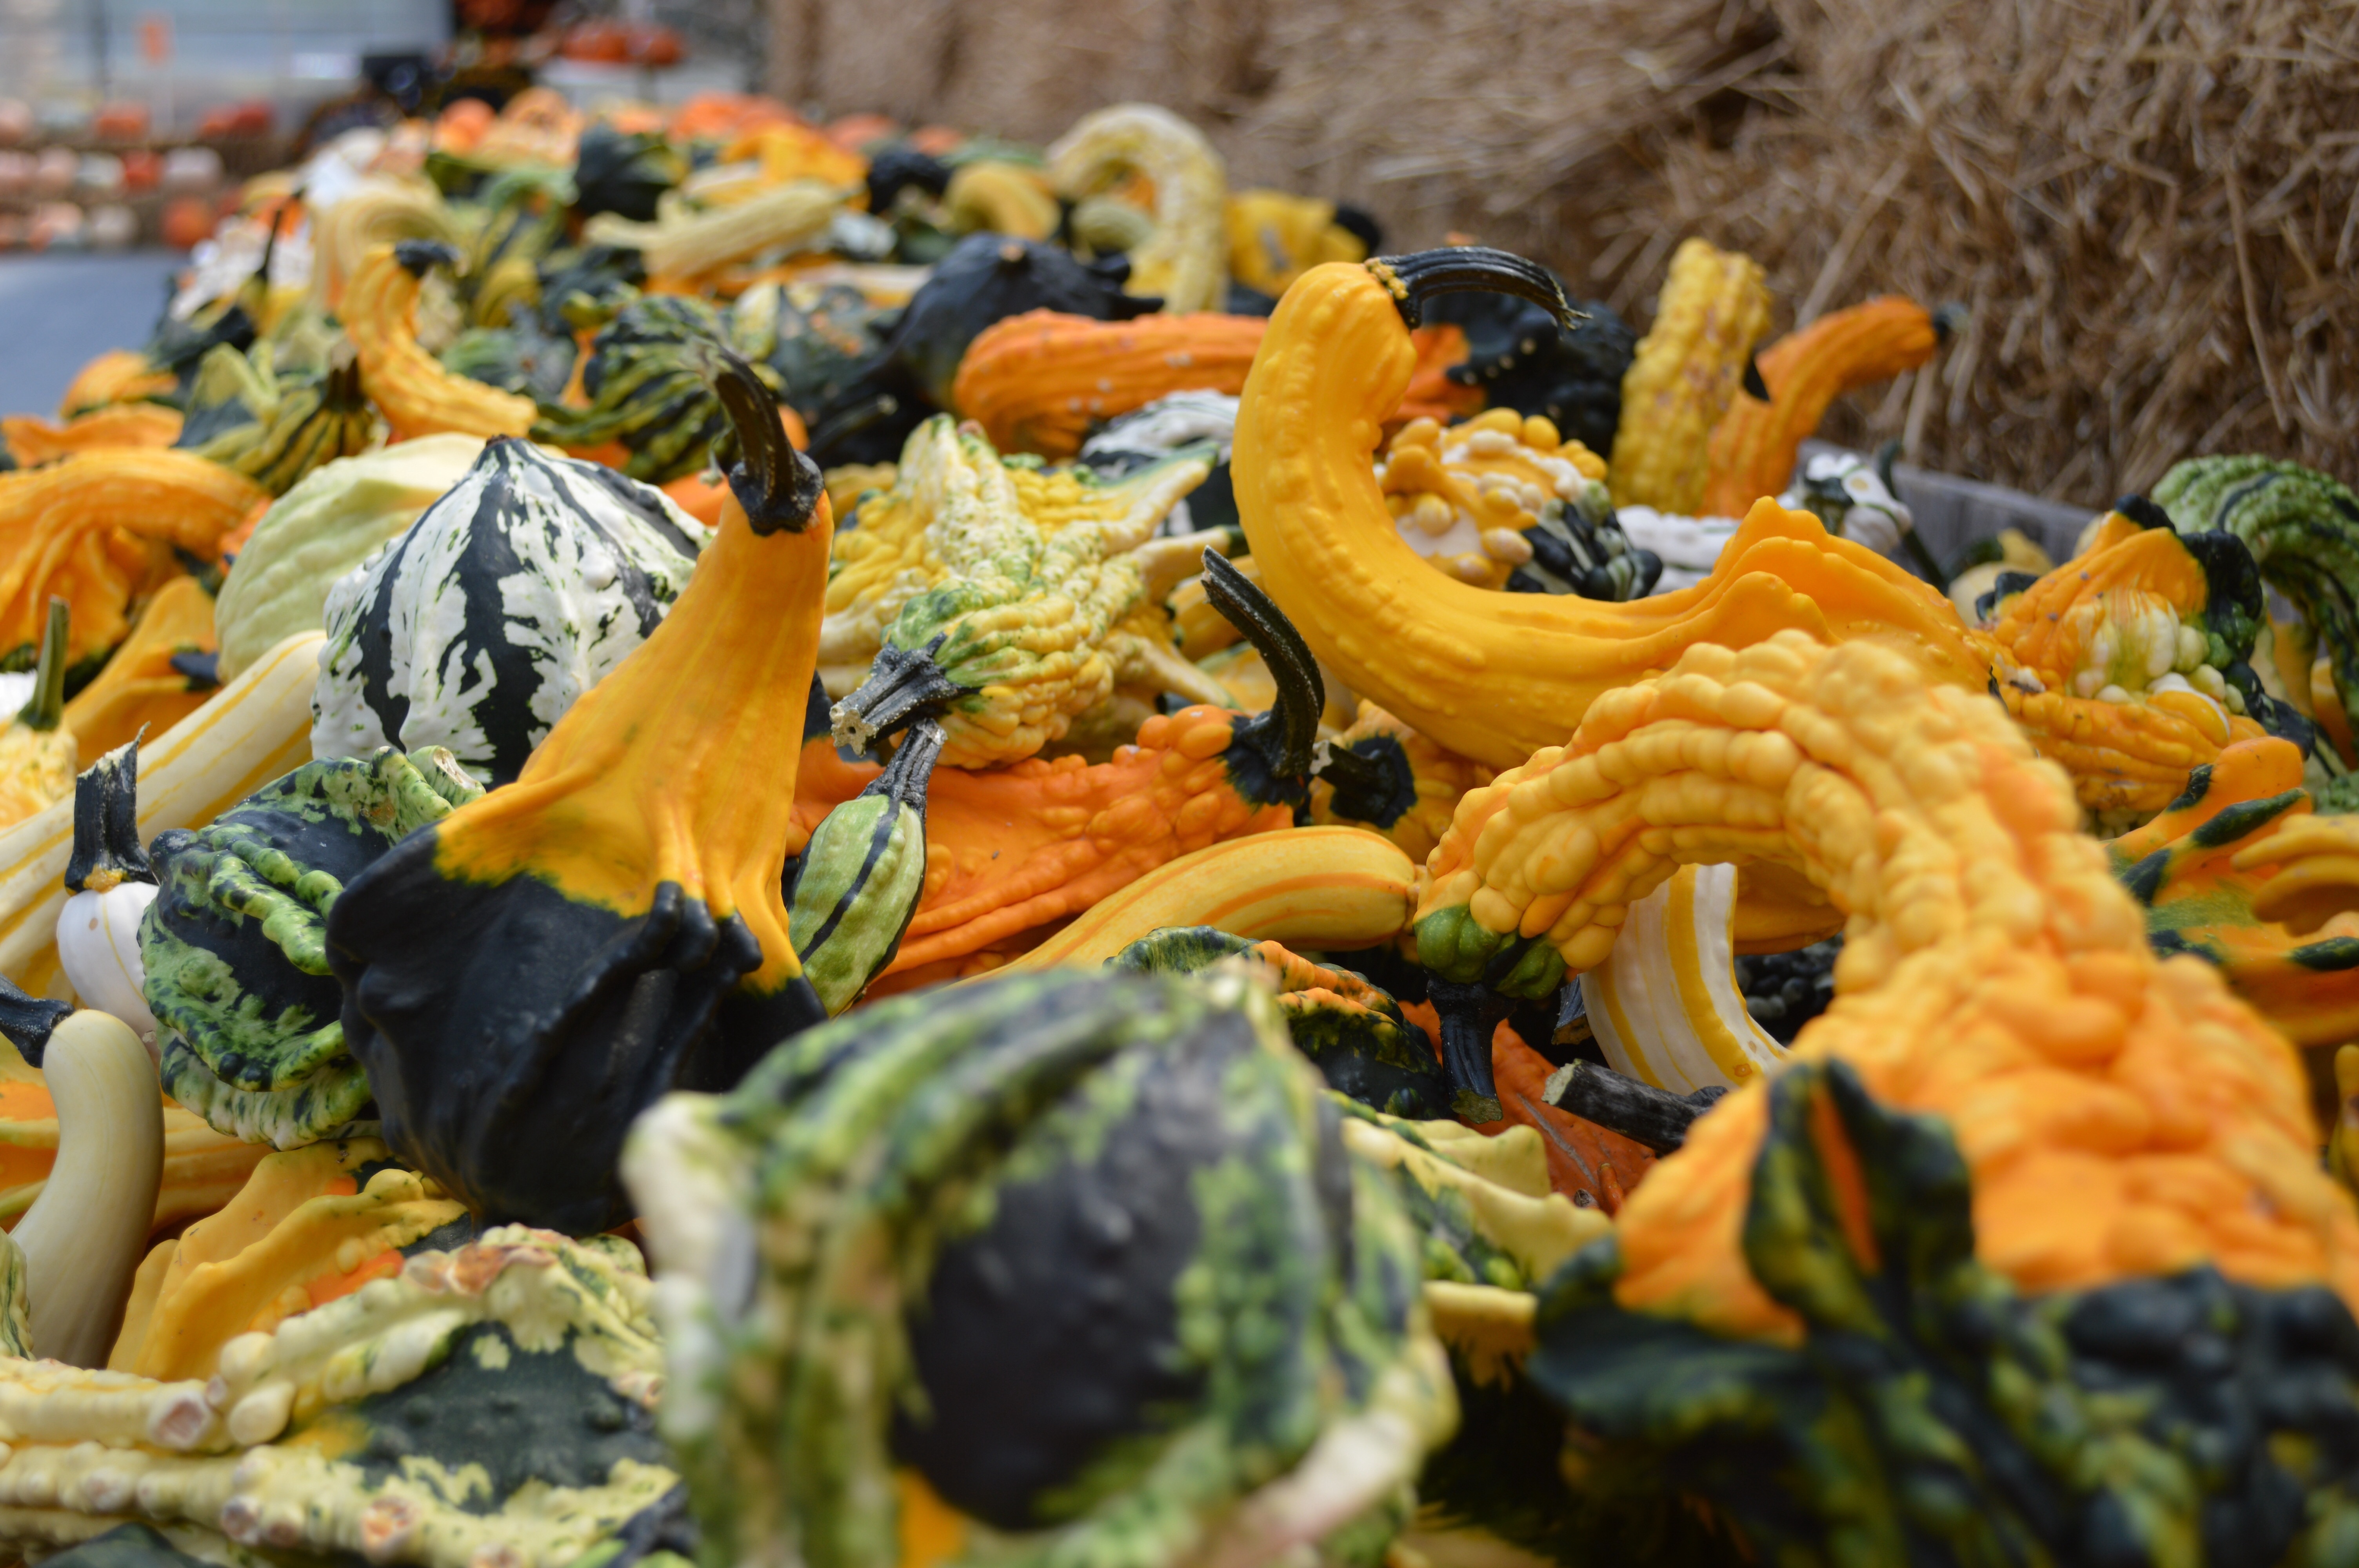 Decoration, Autumn, Fall, Gourds, vegetable, no people